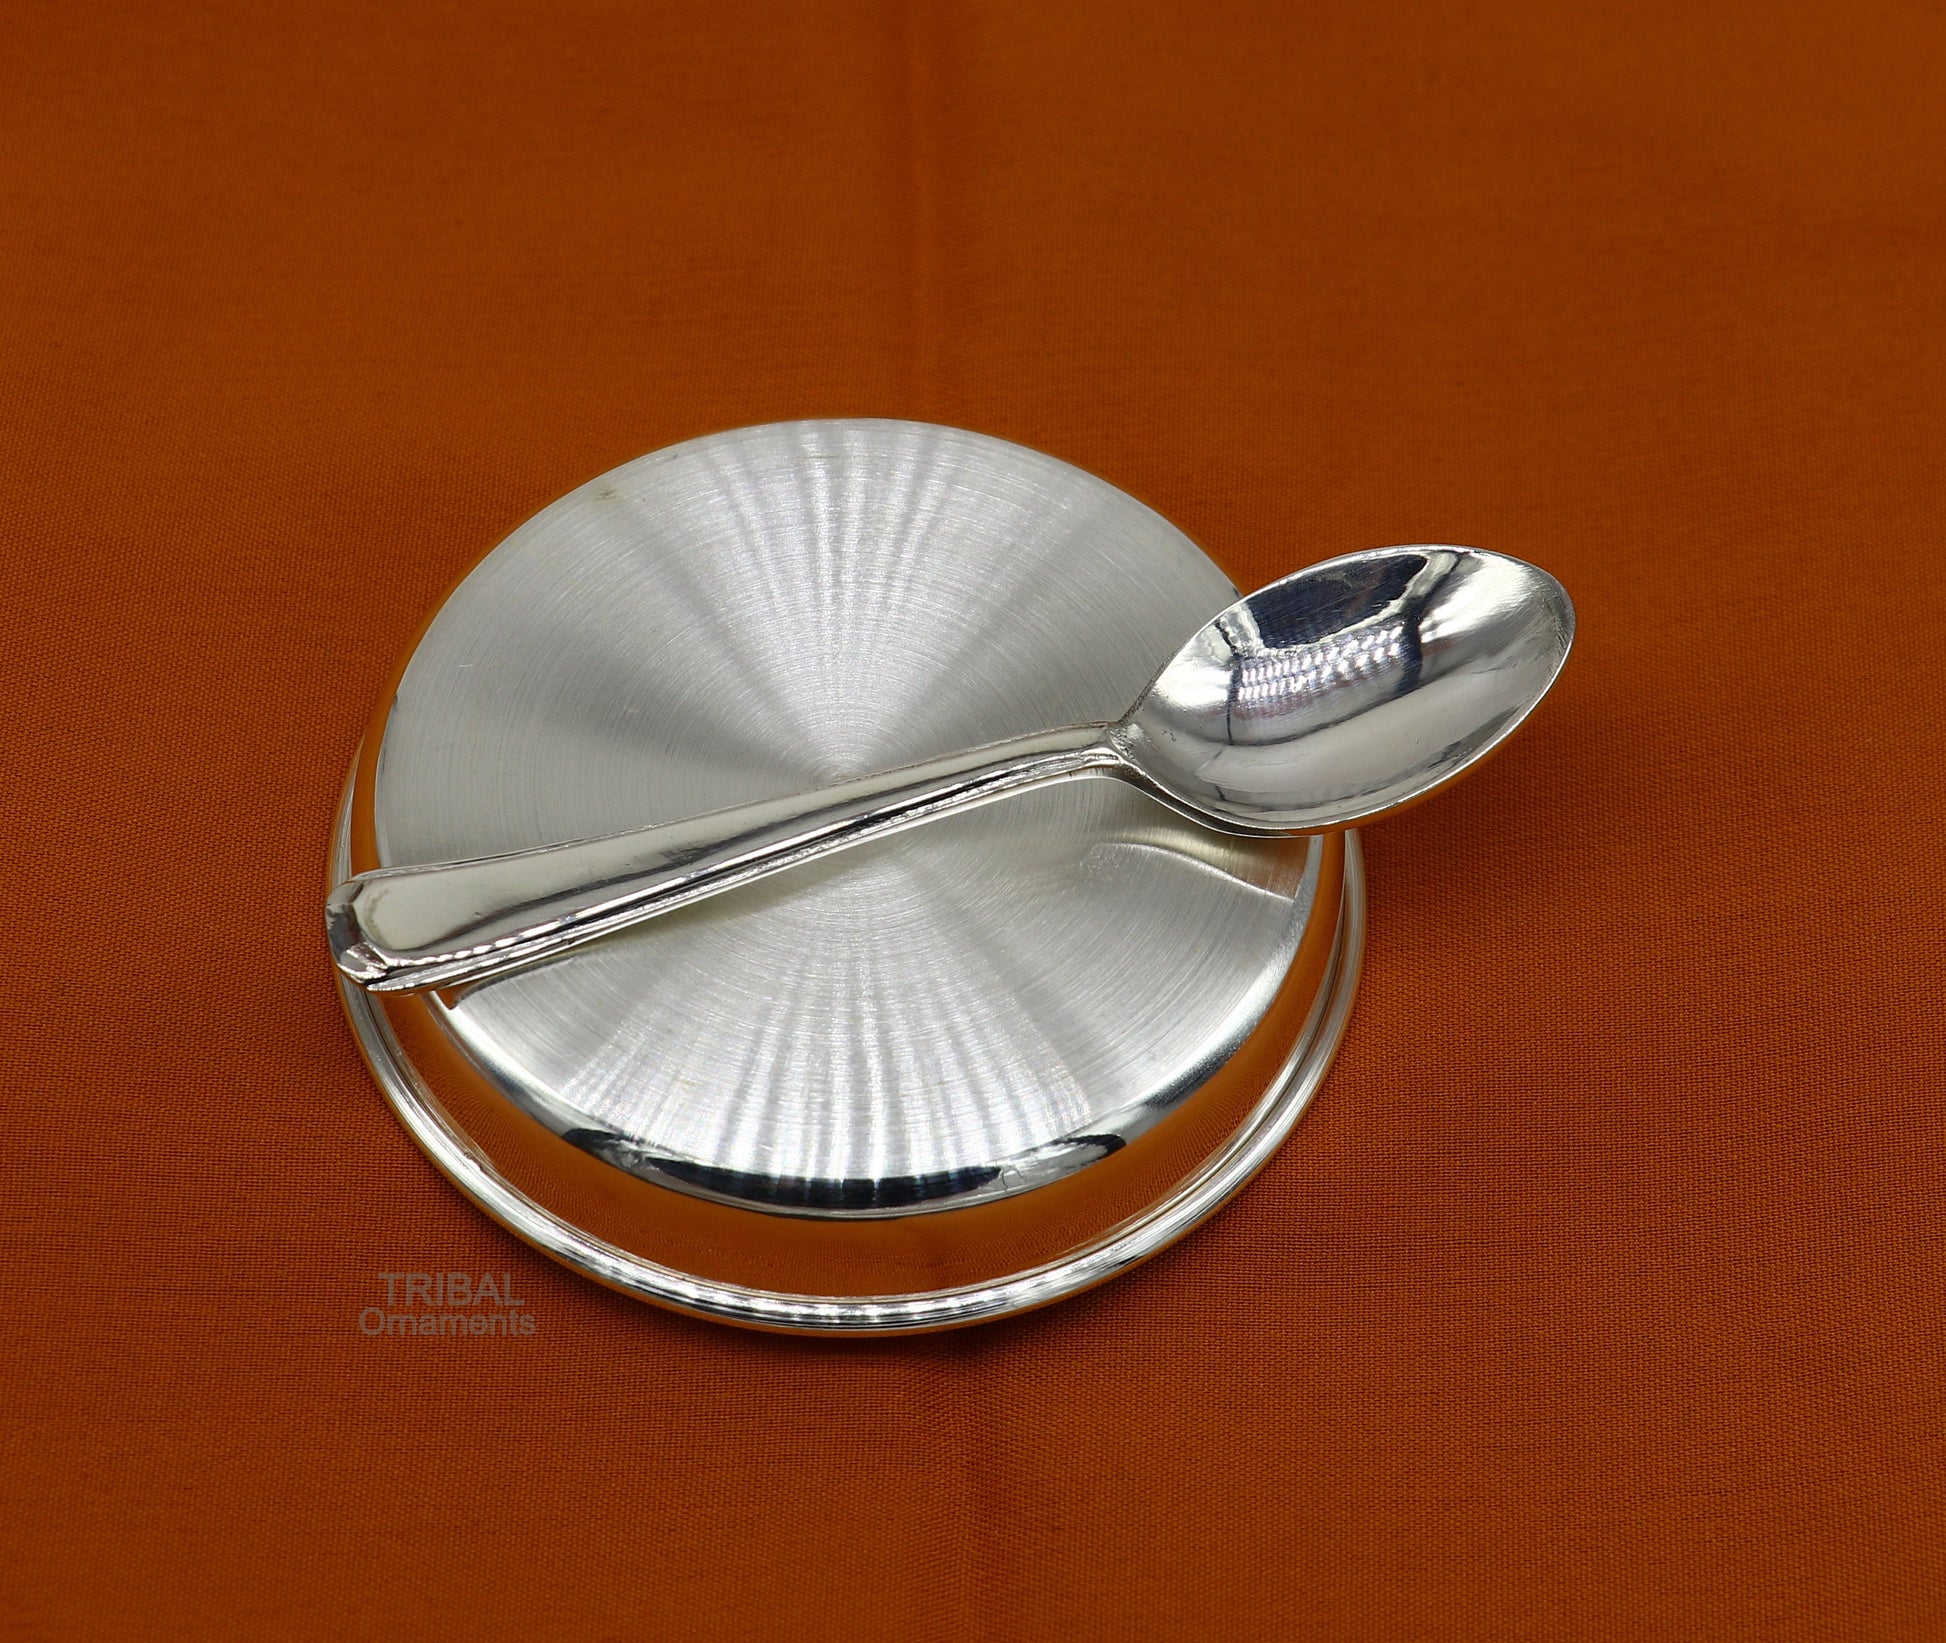 999 fine solid silver handmade plate/tray and spoon set for baby food serving, milk bowl silver utensils, home and kitchen accessories sv251 - TRIBAL ORNAMENTS